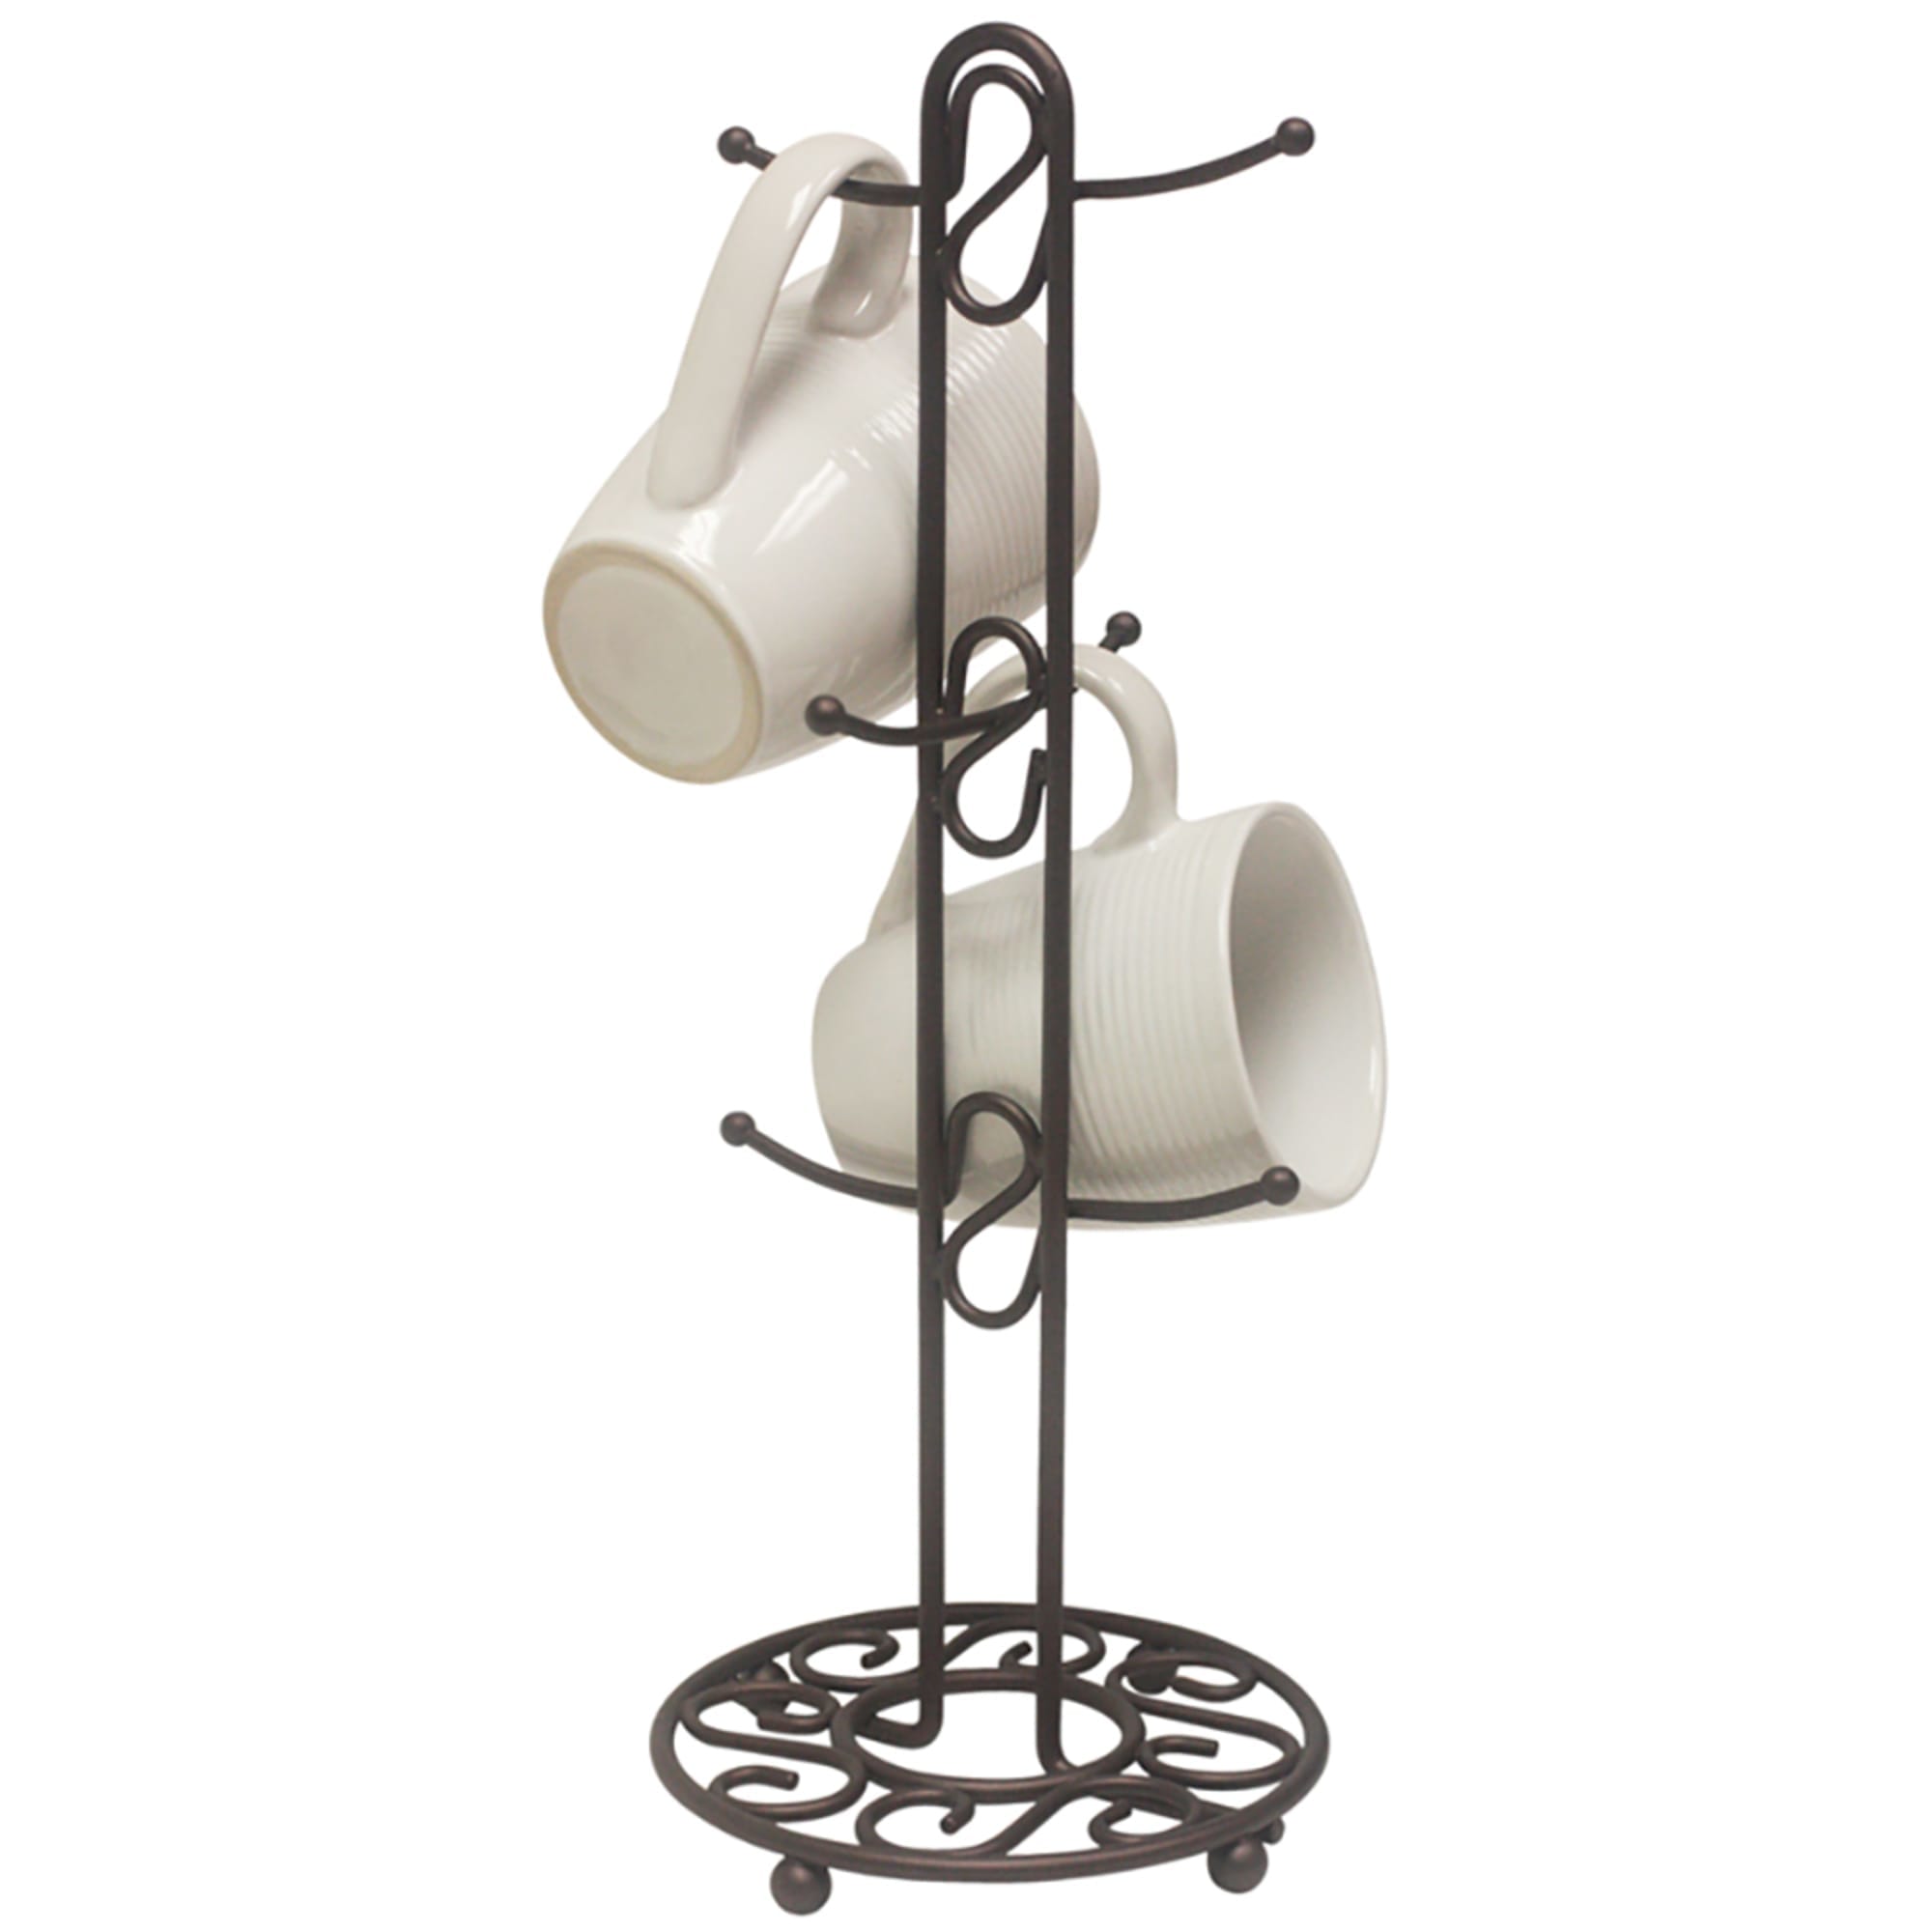 Home Basics Scroll Collection Steel Mug Tree, Bronze $5.00 EACH, CASE PACK OF 12